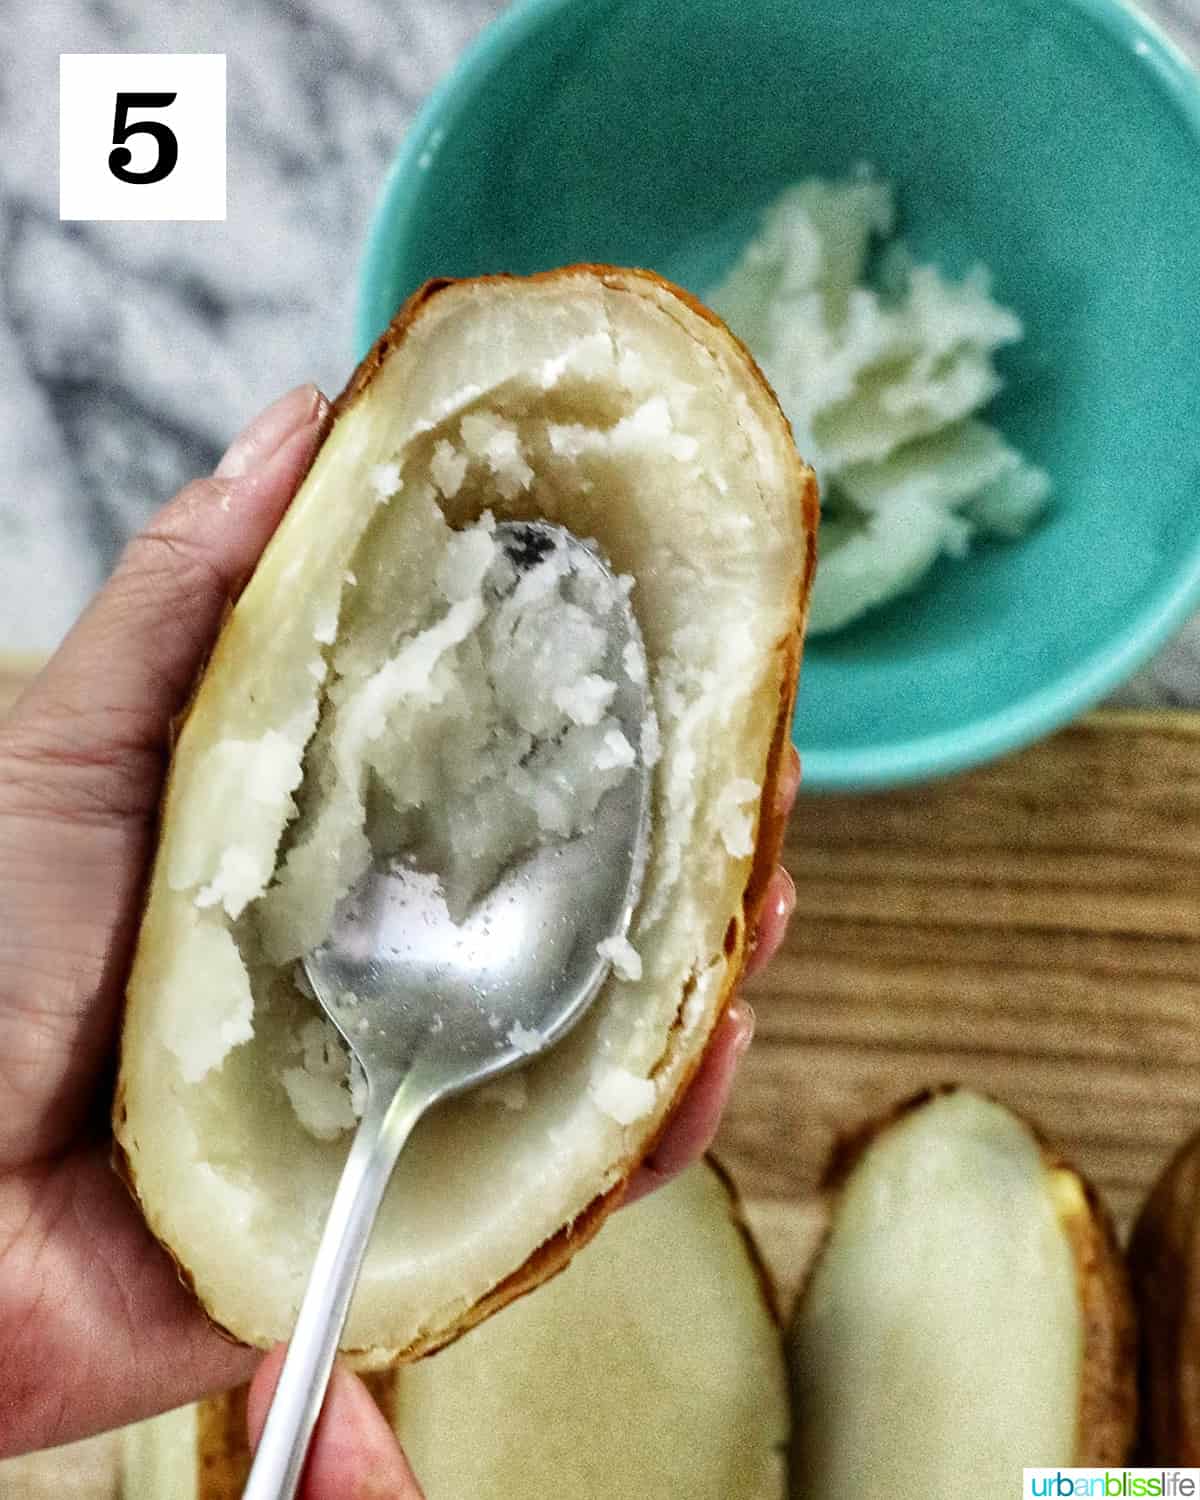 a spoon scooping out the center of a baked potato.